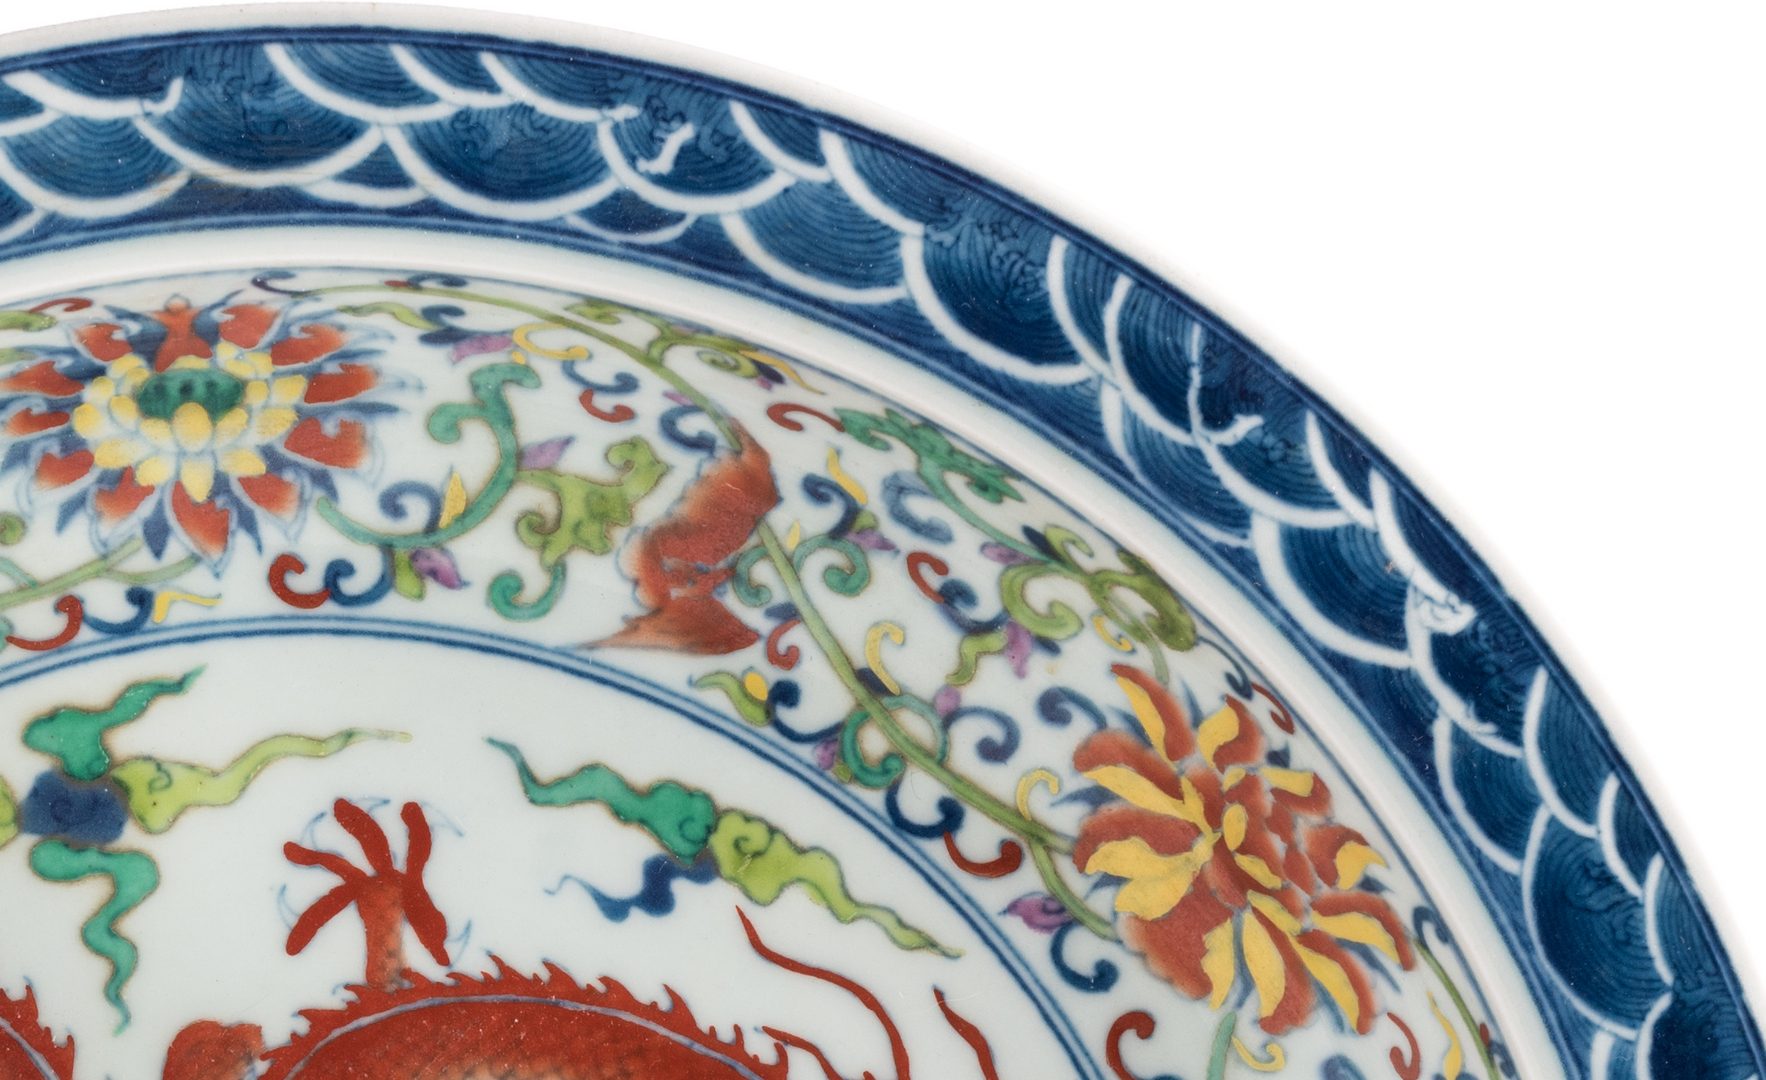 Lot 19: Chinese Wucai Porcelain Charger